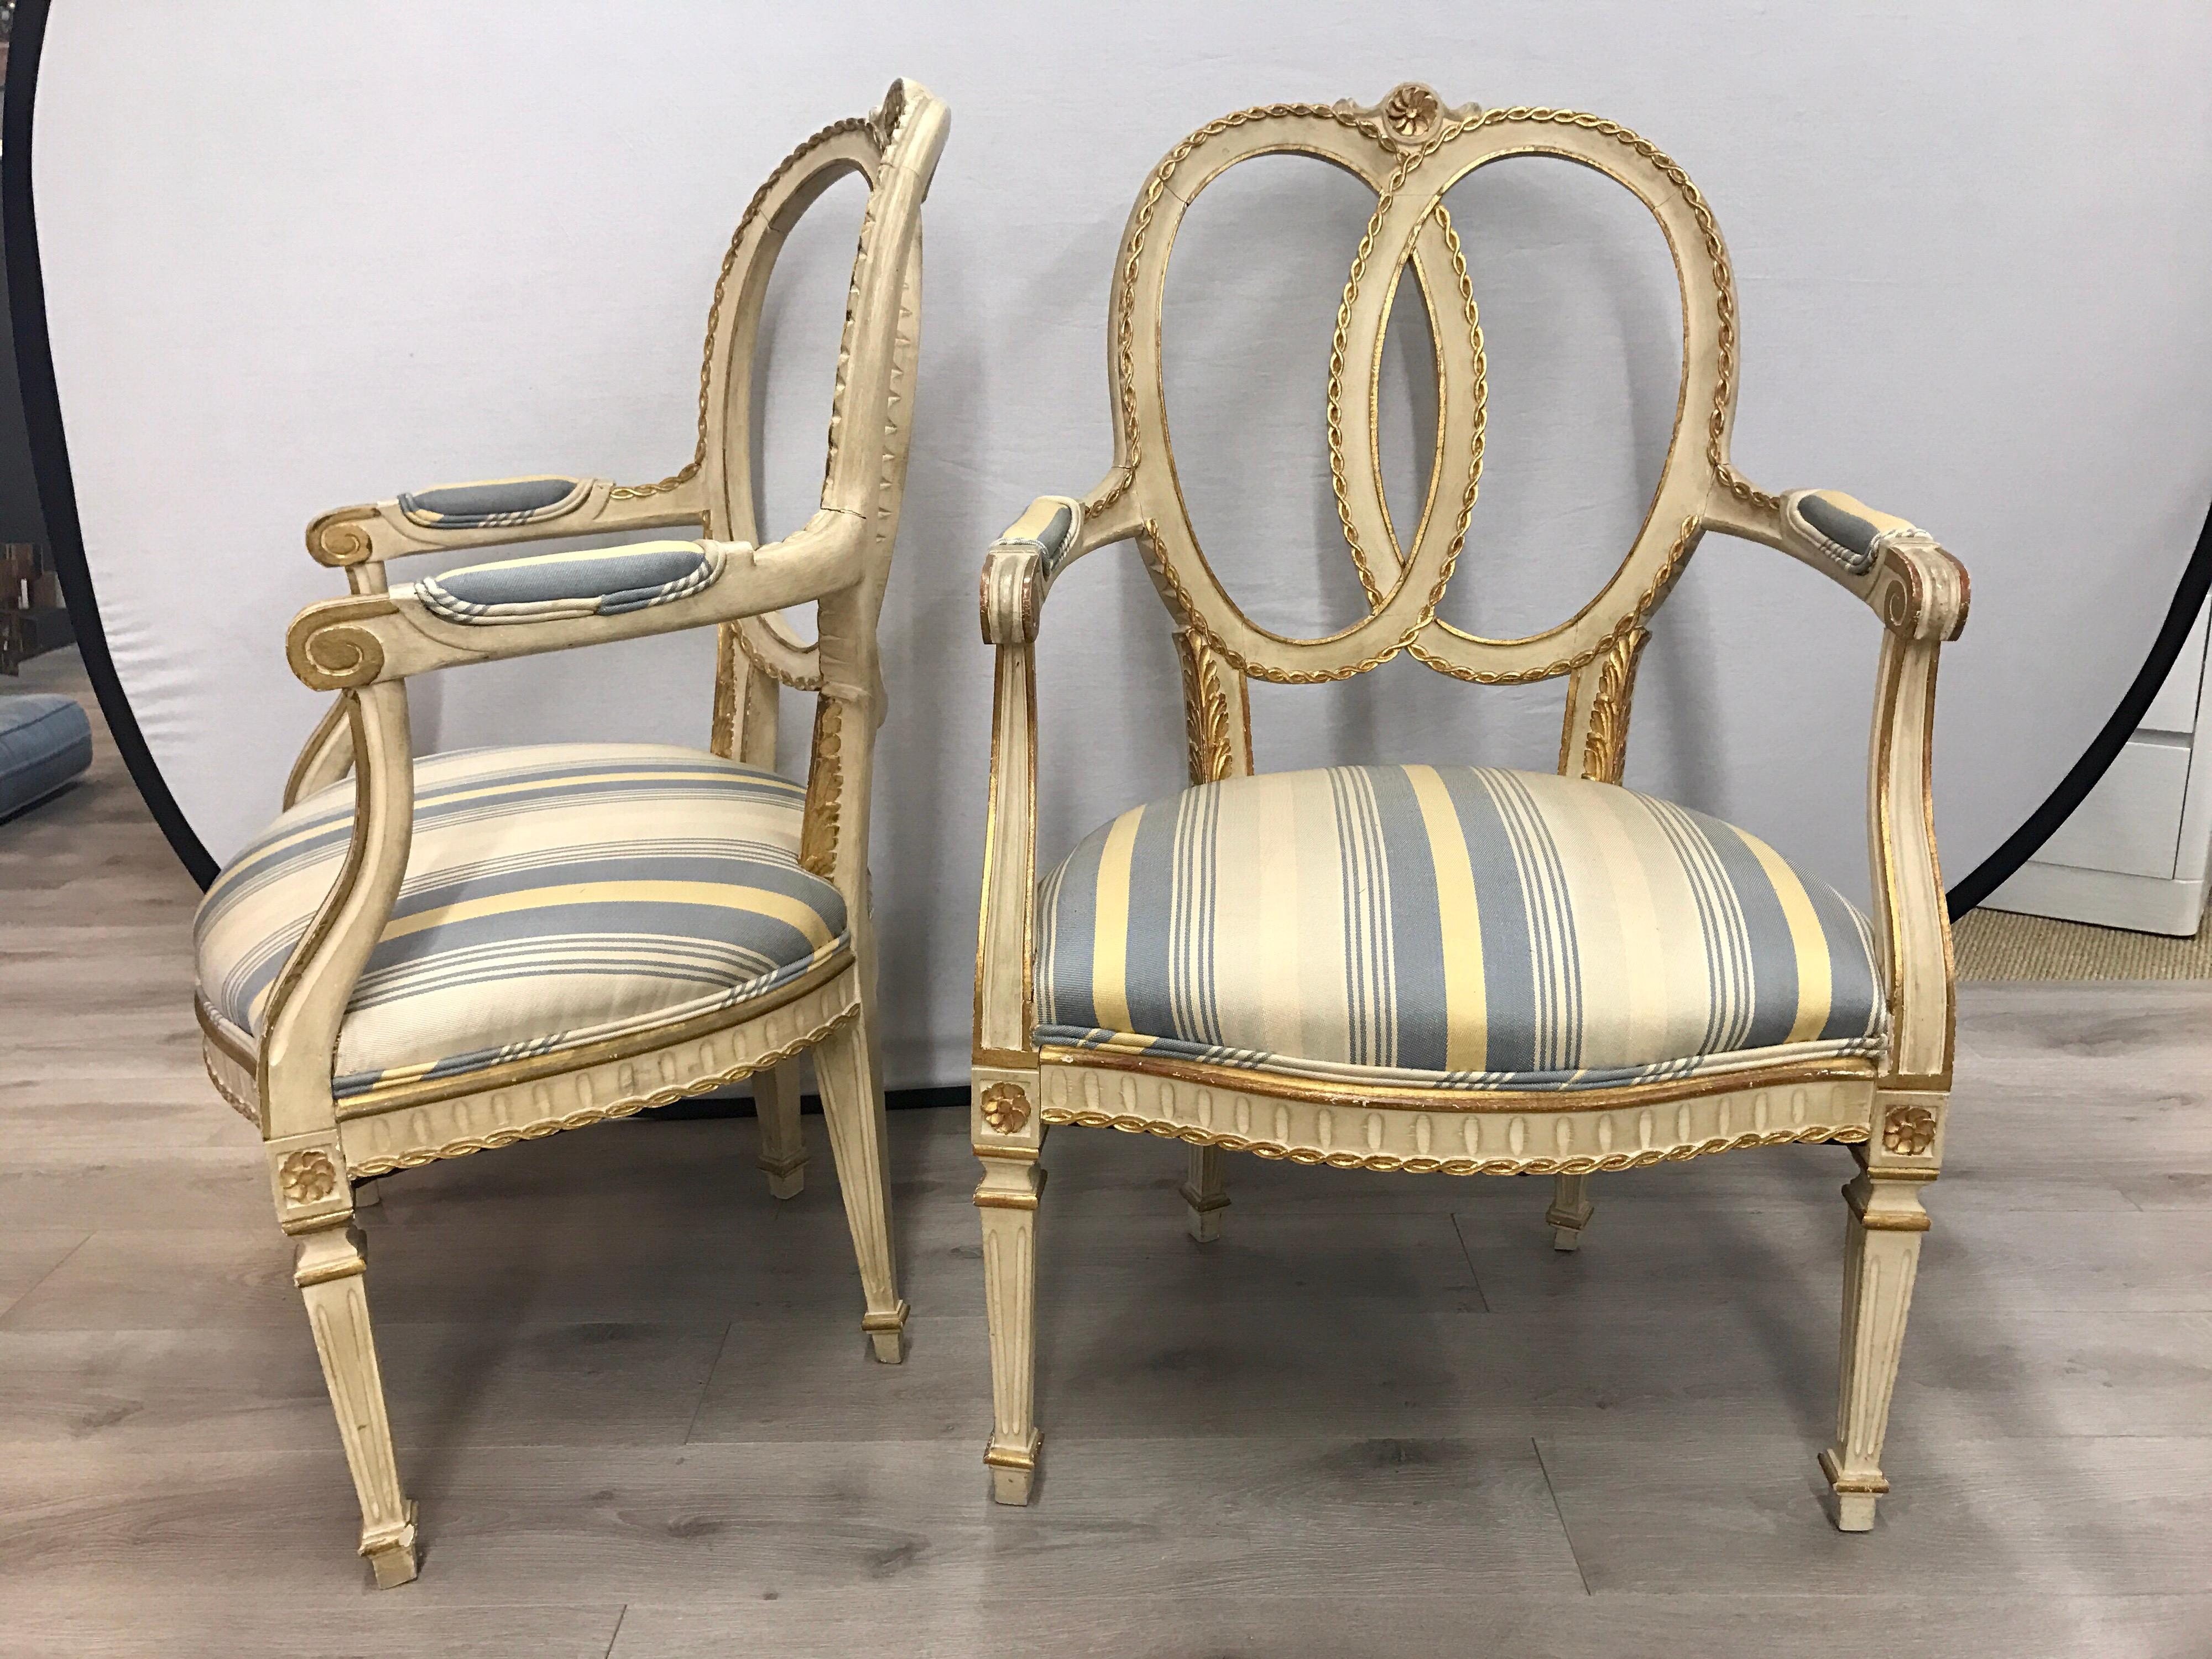 Elegant pair of French cream and gold painted armchairs with blue and pale yellow striped upholstery. Gorgeous aged patina.